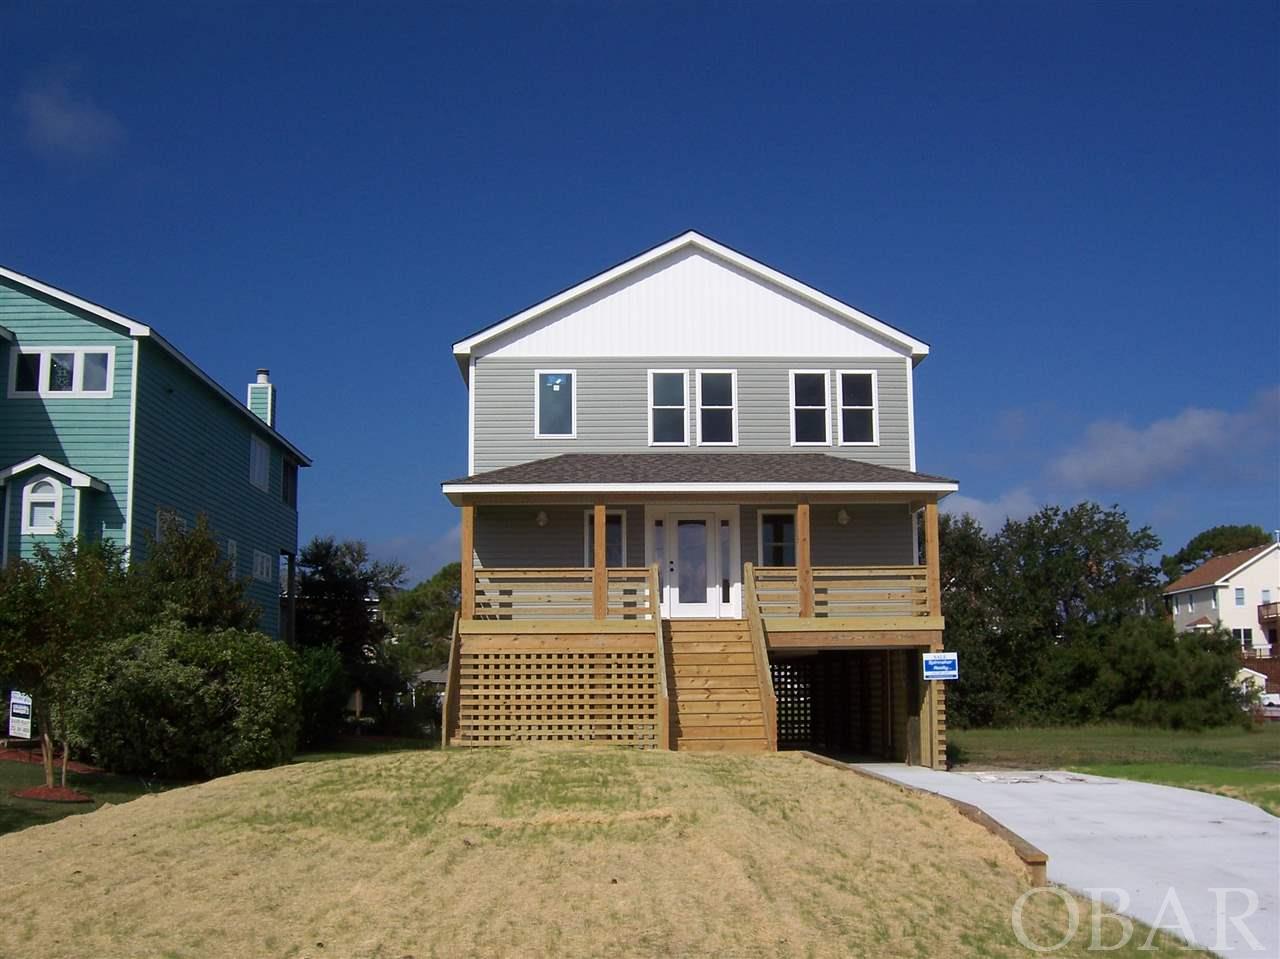 133 Lee Court Lot 57 Outer Banks Home Listings - Holleay Parcker - Spinnaker Realty Outer Banks (OBX) Real Estate